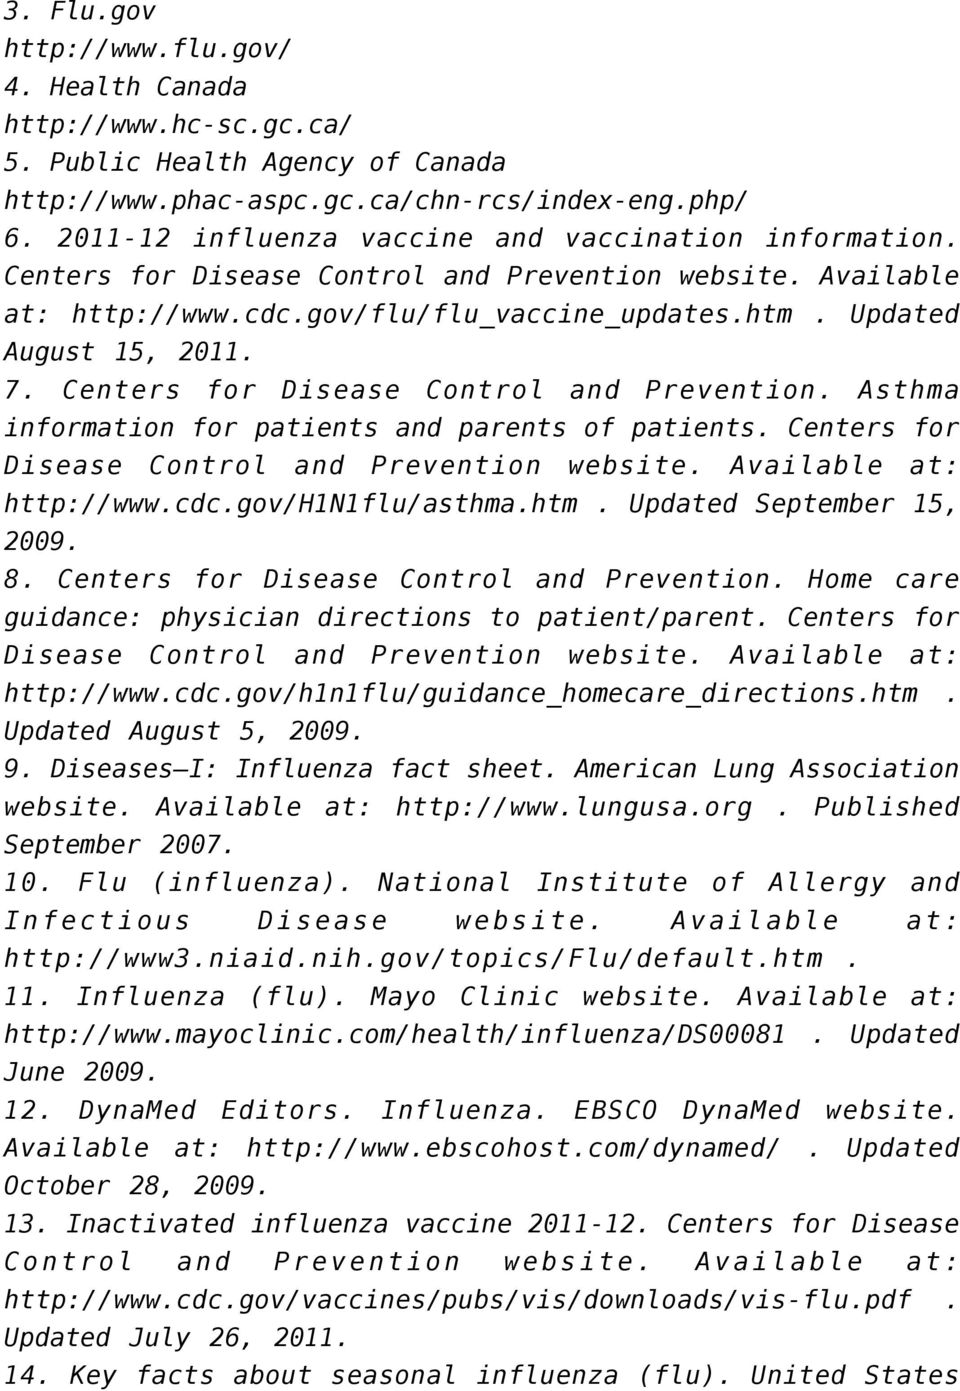 Centers for Disease Control and Prevention. Asthma information for patients and parents of patients. Centers for Disease Control and Prevention website. Available at: http://www.cdc.